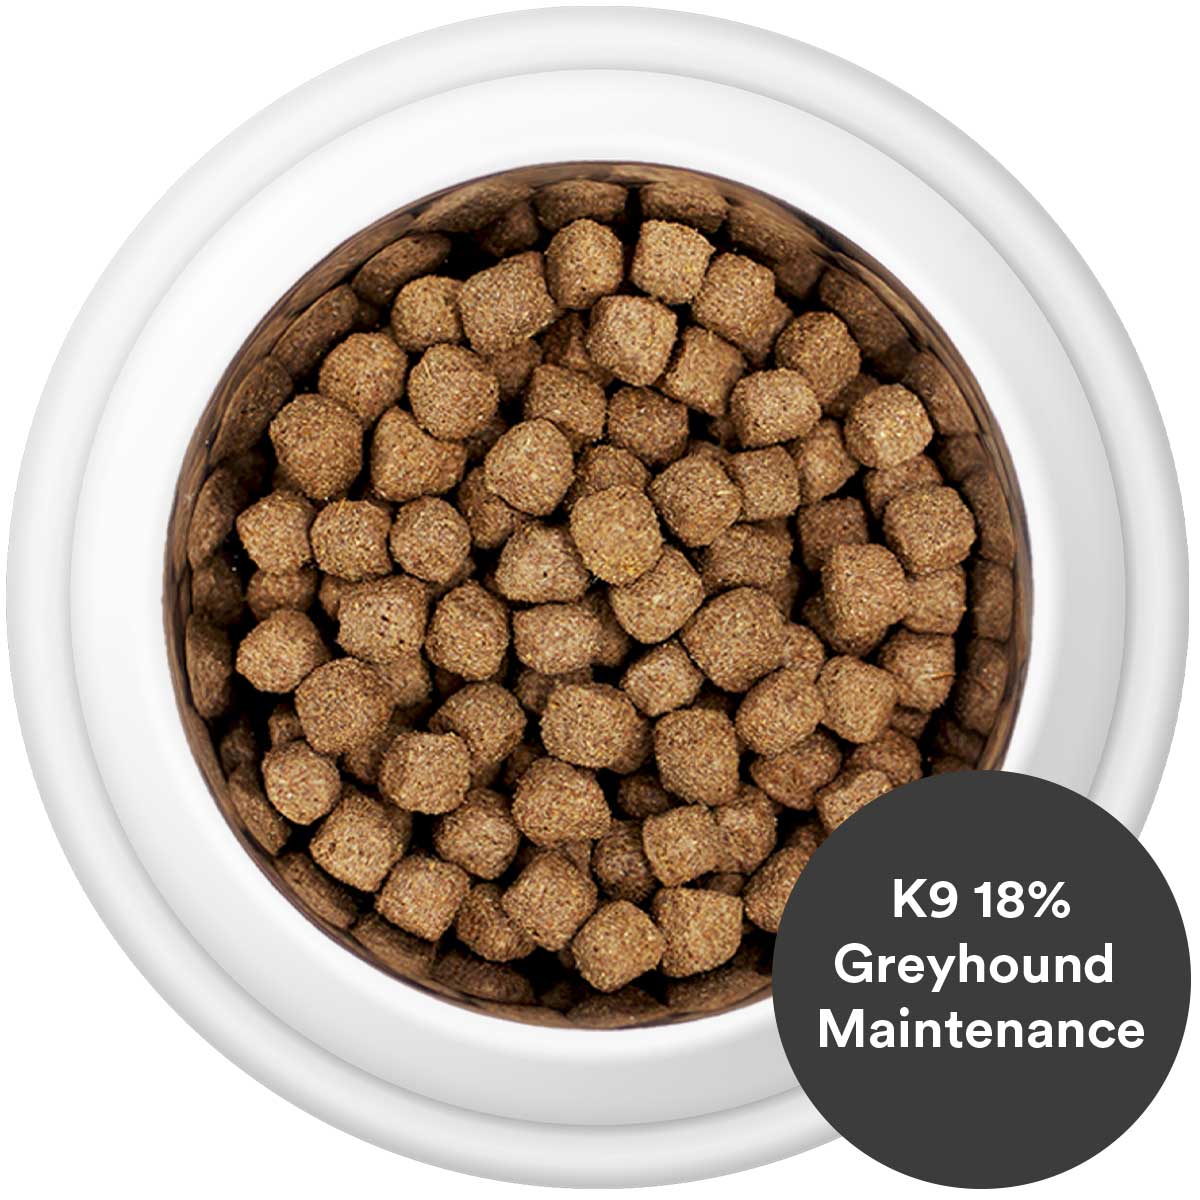 Country Pursuit K9 Greyhound Maintenance Dog Food in a bowl